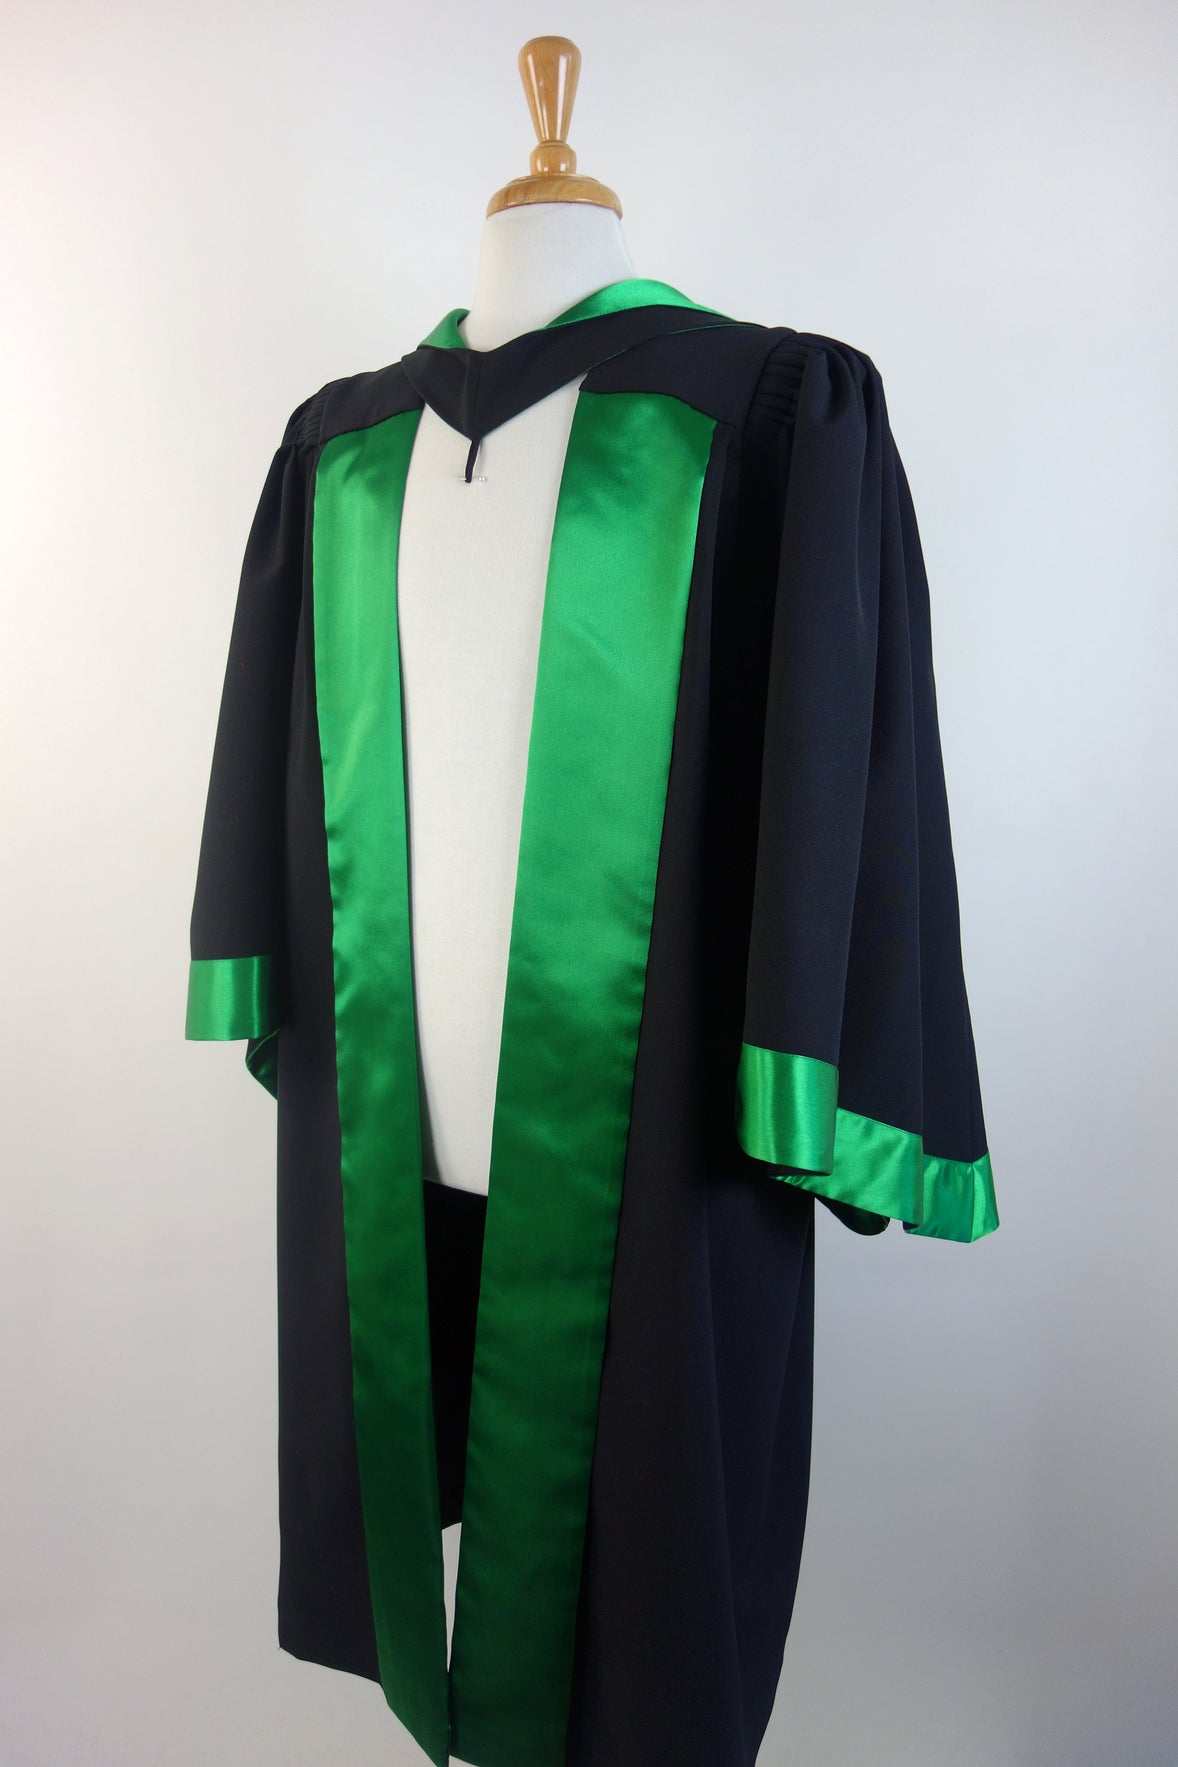 University of Divinity Doctor of Ministry Studies Graduation Gown Set - Gown, Hood and Bonnet